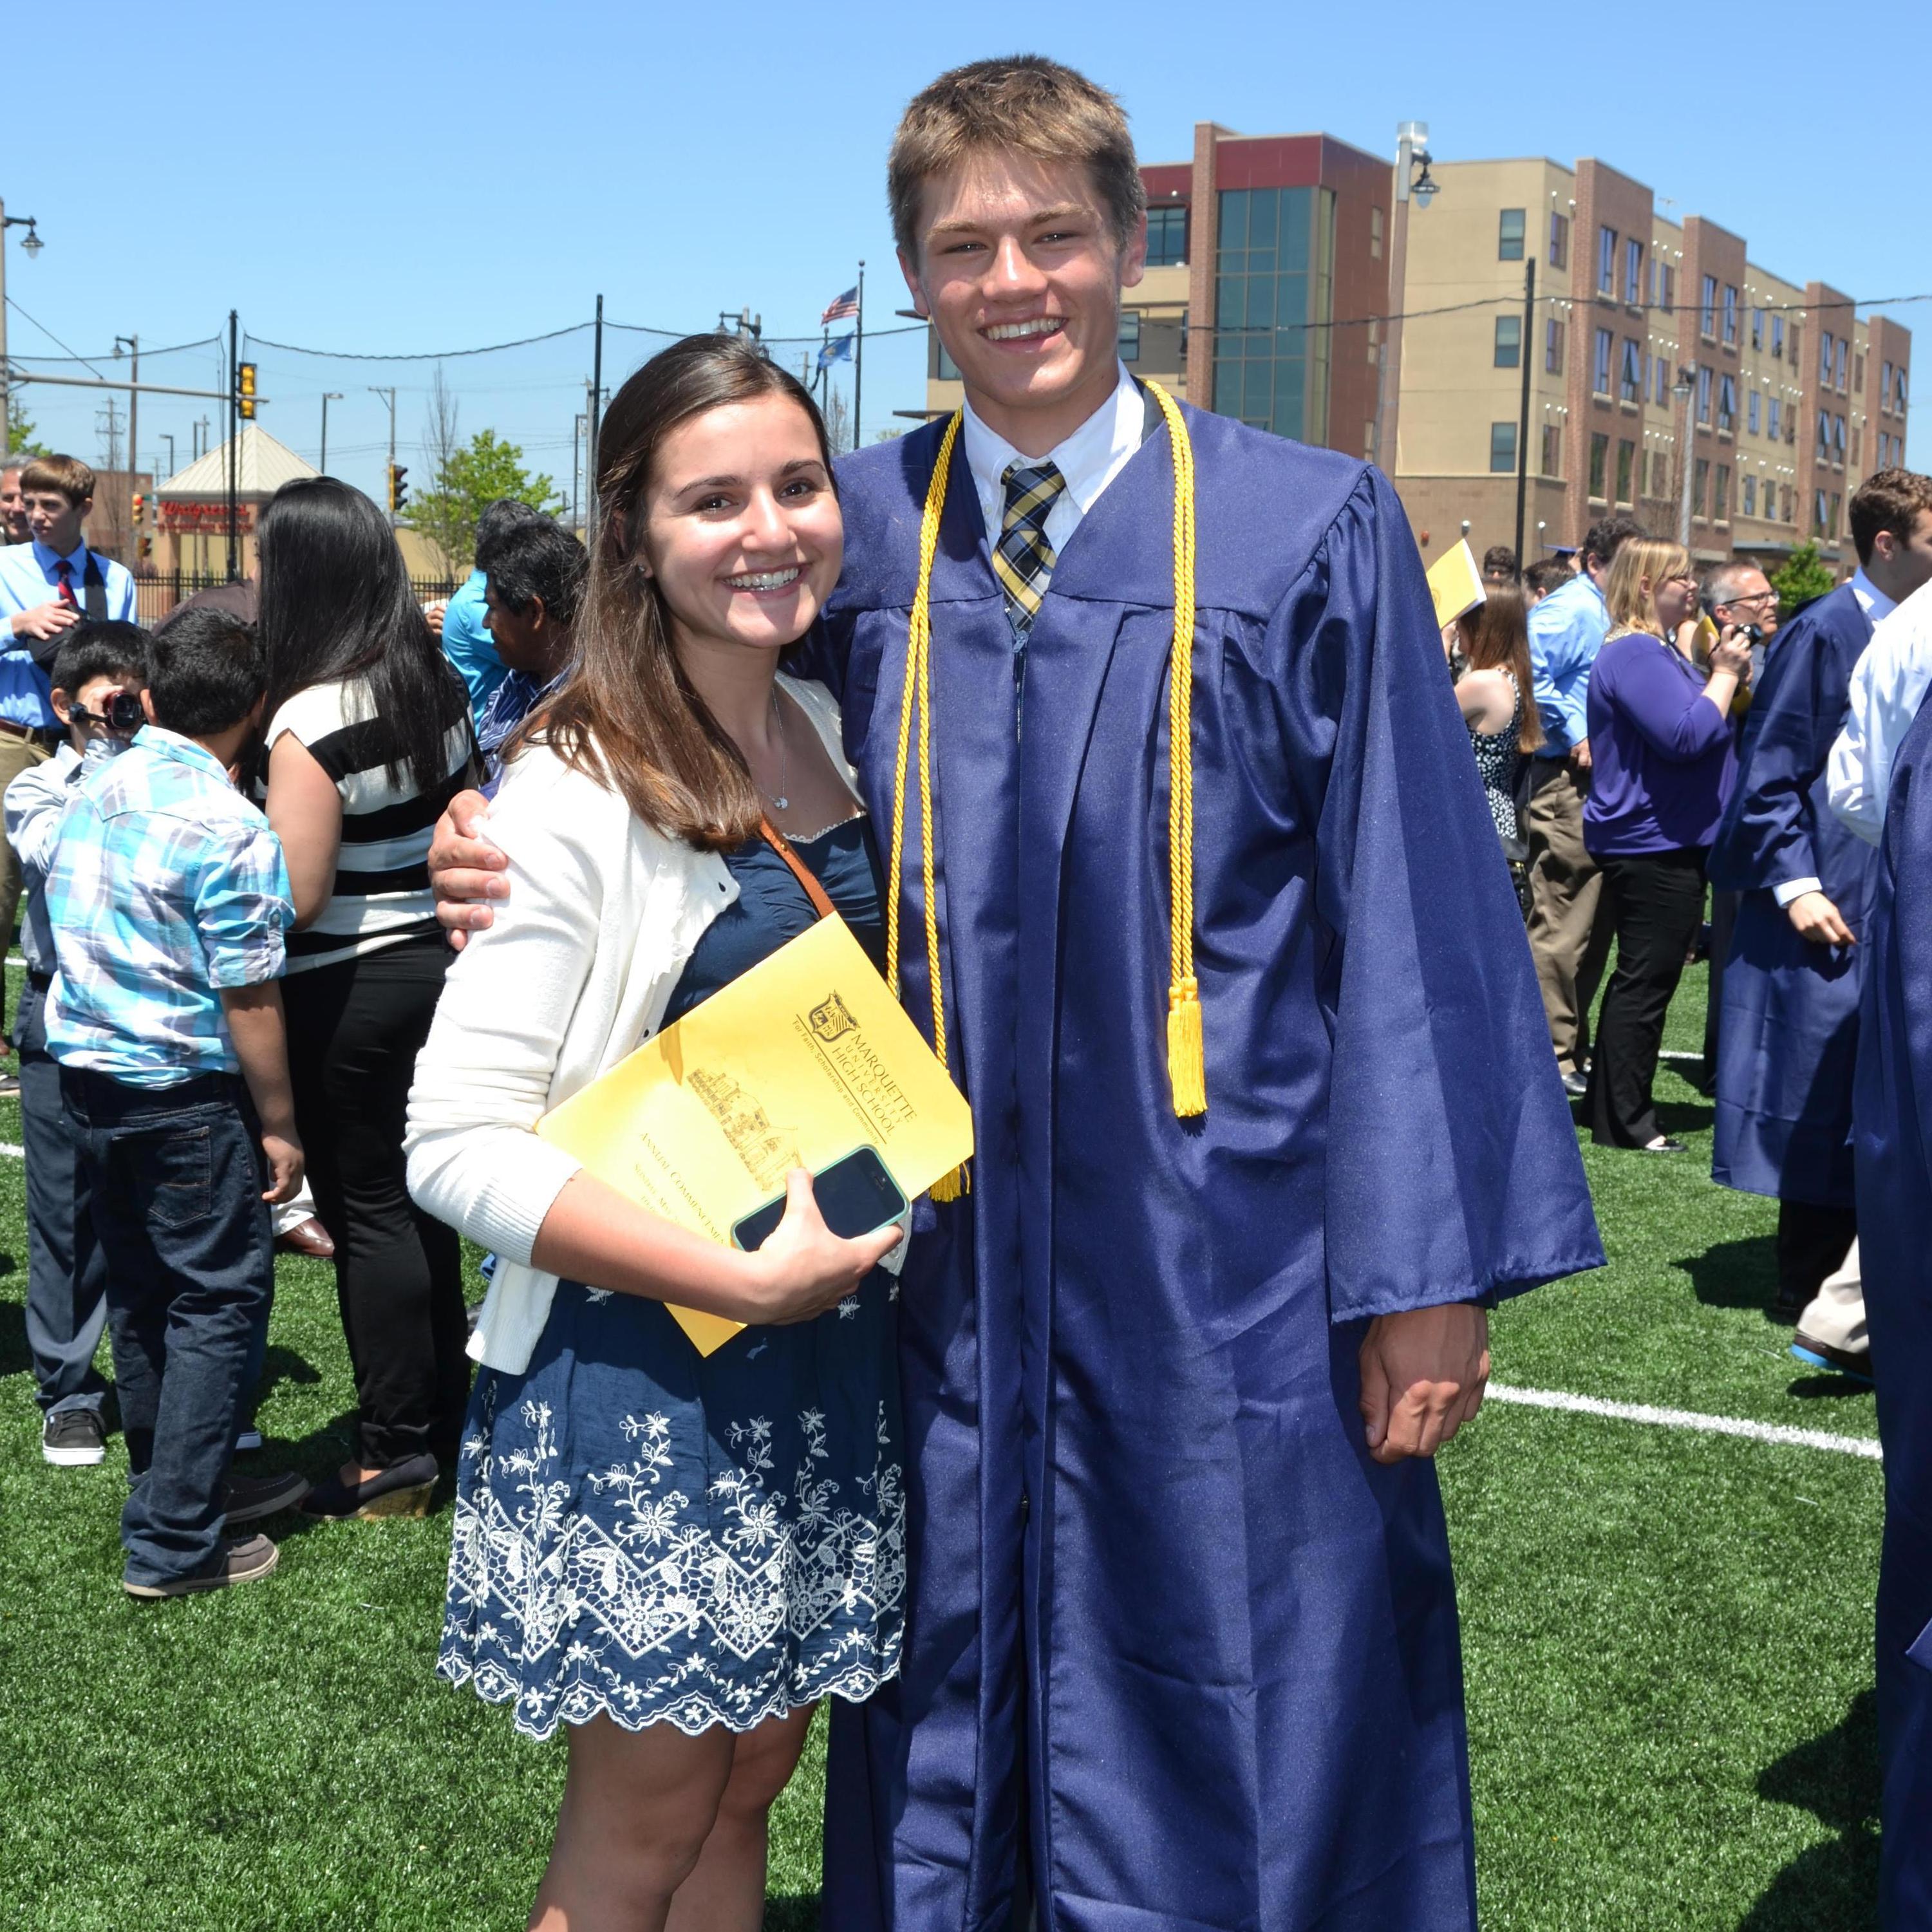 Our first picture together -- before we were dating! -- at Alex's high school graduation in 2014.